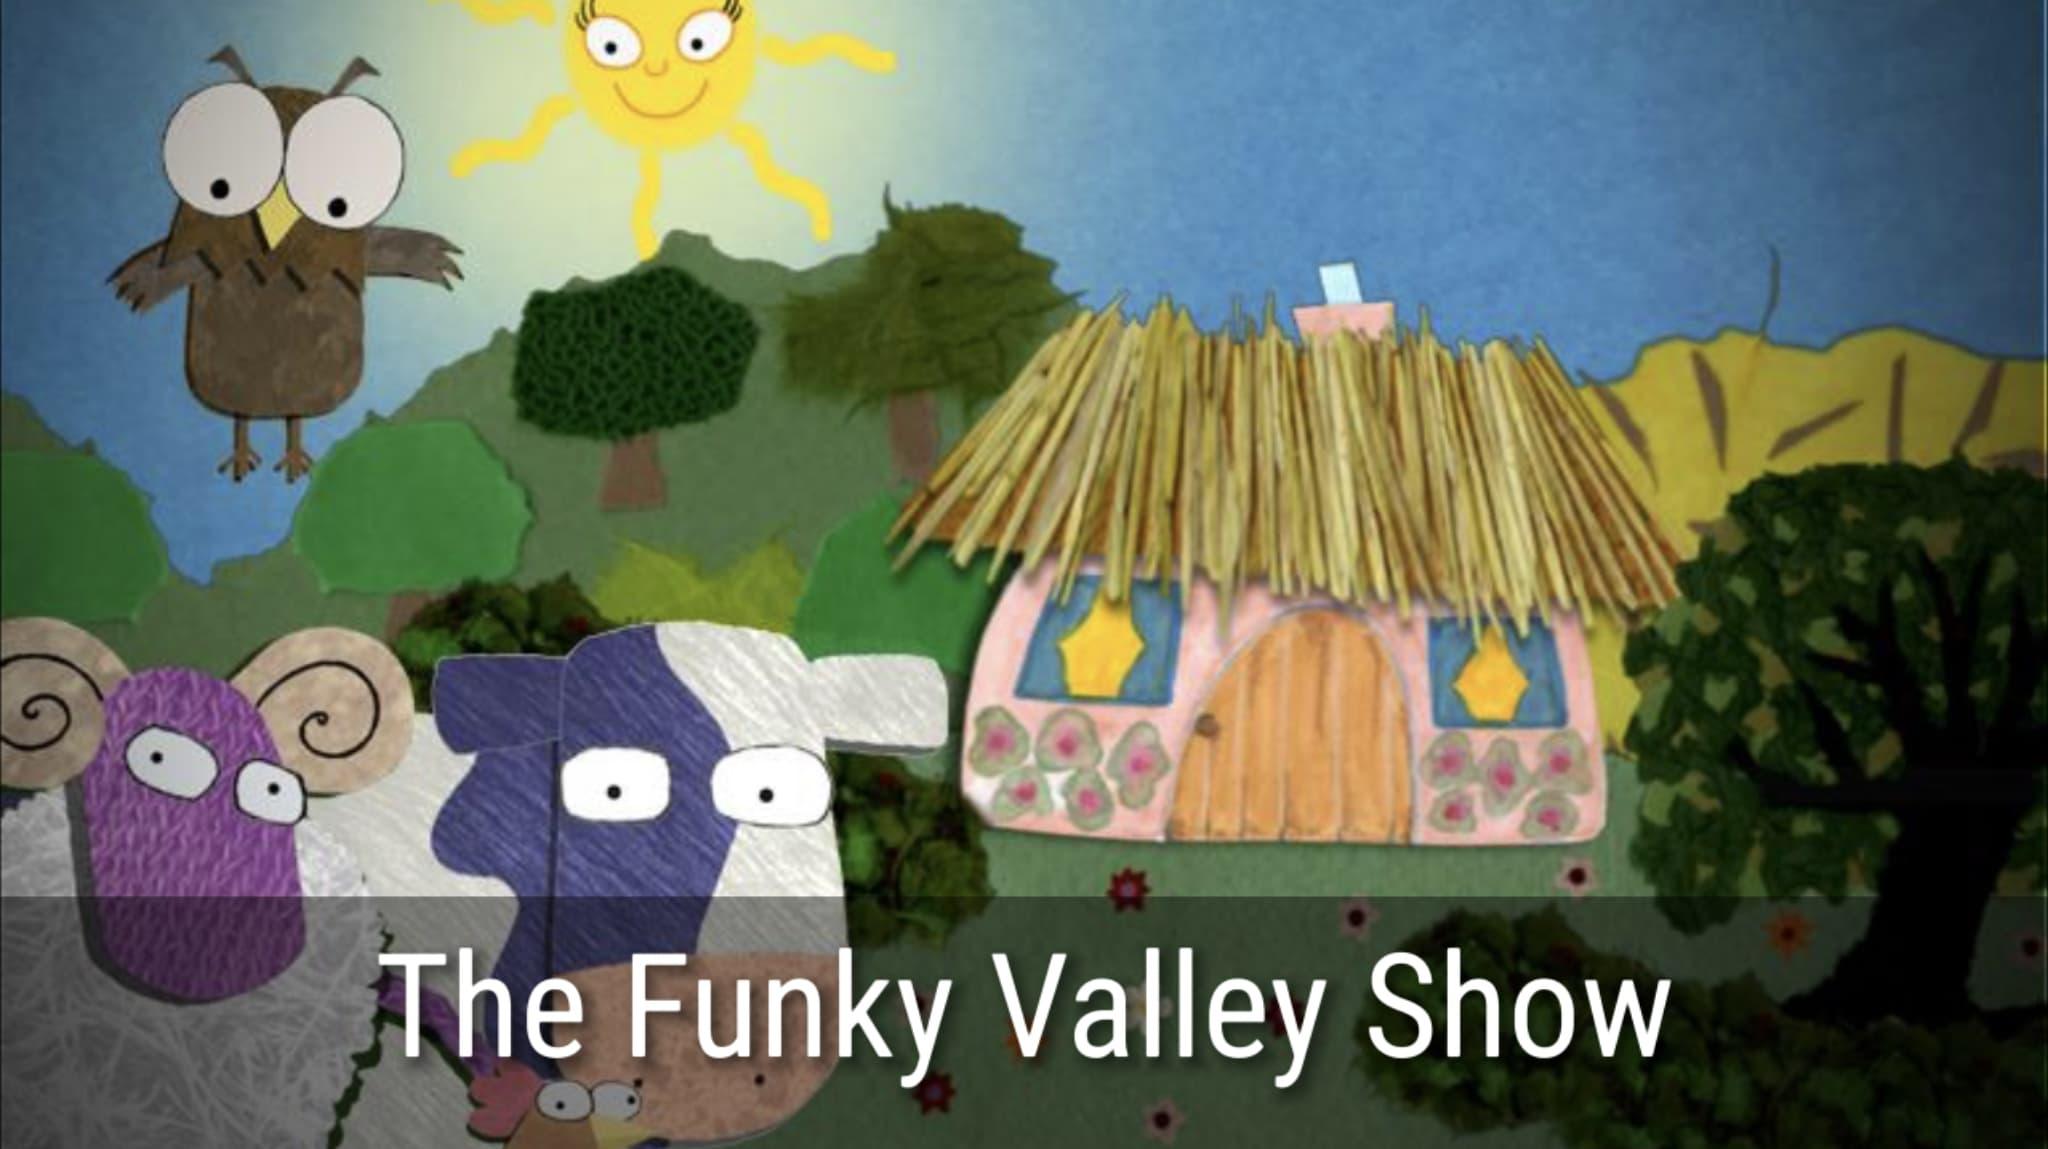 The Funky Valley Show backdrop